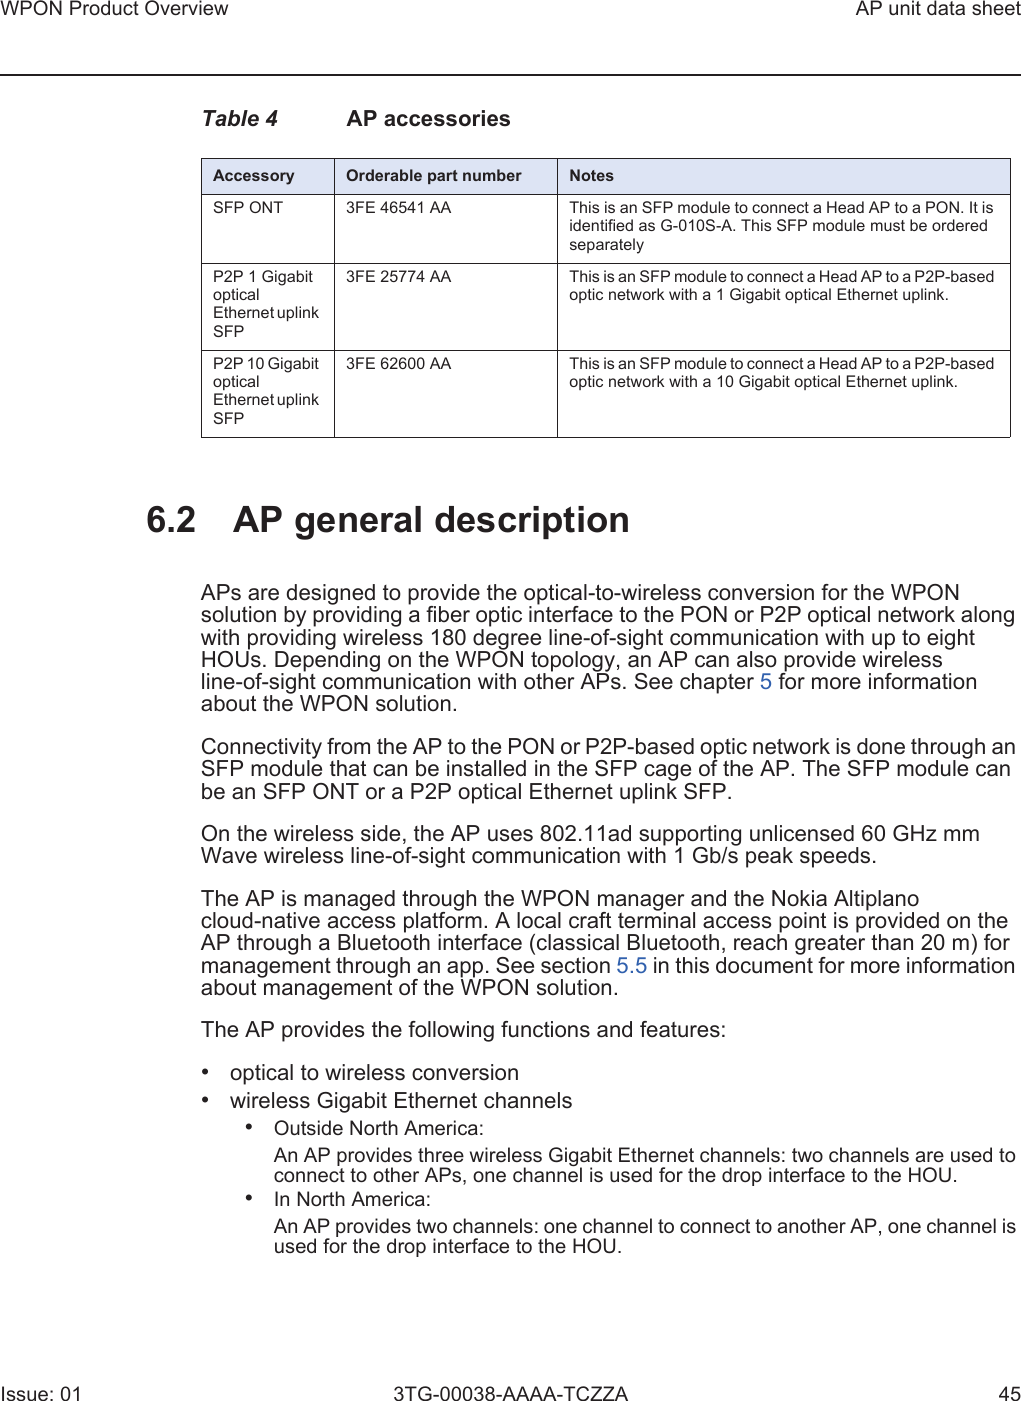 WPON Product Overview AP unit data sheetIssue: 01 3TG-00038-AAAA-TCZZA 45Table 4 AP accessories6.2 AP general descriptionAPs are designed to provide the optical-to-wireless conversion for the WPON solution by providing a fiber optic interface to the PON or P2P optical network along with providing wireless 180 degree line-of-sight communication with up to eight HOUs. Depending on the WPON topology, an AP can also provide wireless line-of-sight communication with other APs. See chapter 5 for more information about the WPON solution.Connectivity from the AP to the PON or P2P-based optic network is done through an SFP module that can be installed in the SFP cage of the AP. The SFP module can be an SFP ONT or a P2P optical Ethernet uplink SFP.On the wireless side, the AP uses 802.11ad supporting unlicensed 60 GHz mm Wave wireless line-of-sight communication with 1 Gb/s peak speeds.The AP is managed through the WPON manager and the Nokia Altiplano cloud-native access platform. A local craft terminal access point is provided on the AP through a Bluetooth interface (classical Bluetooth, reach greater than 20 m) for management through an app. See section 5.5 in this document for more information about management of the WPON solution. The AP provides the following functions and features:•optical to wireless conversion•wireless Gigabit Ethernet channels•Outside North America:An AP provides three wireless Gigabit Ethernet channels: two channels are used toconnect to other APs, one channel is used for the drop interface to the HOU.•In North America:An AP provides two channels: one channel to connect to another AP, one channel isused for the drop interface to the HOU.Accessory Orderable part number NotesSFP ONT 3FE 46541 AA  This is an SFP module to connect a Head AP to a PON. It is identified as G-010S-A. This SFP module must be ordered separatelyP2P 1 Gigabit optical Ethernet uplink SFP3FE 25774 AA This is an SFP module to connect a Head AP to a P2P-based optic network with a 1 Gigabit optical Ethernet uplink.P2P 10 Gigabit optical Ethernet uplink SFP3FE 62600 AA This is an SFP module to connect a Head AP to a P2P-based optic network with a 10 Gigabit optical Ethernet uplink.